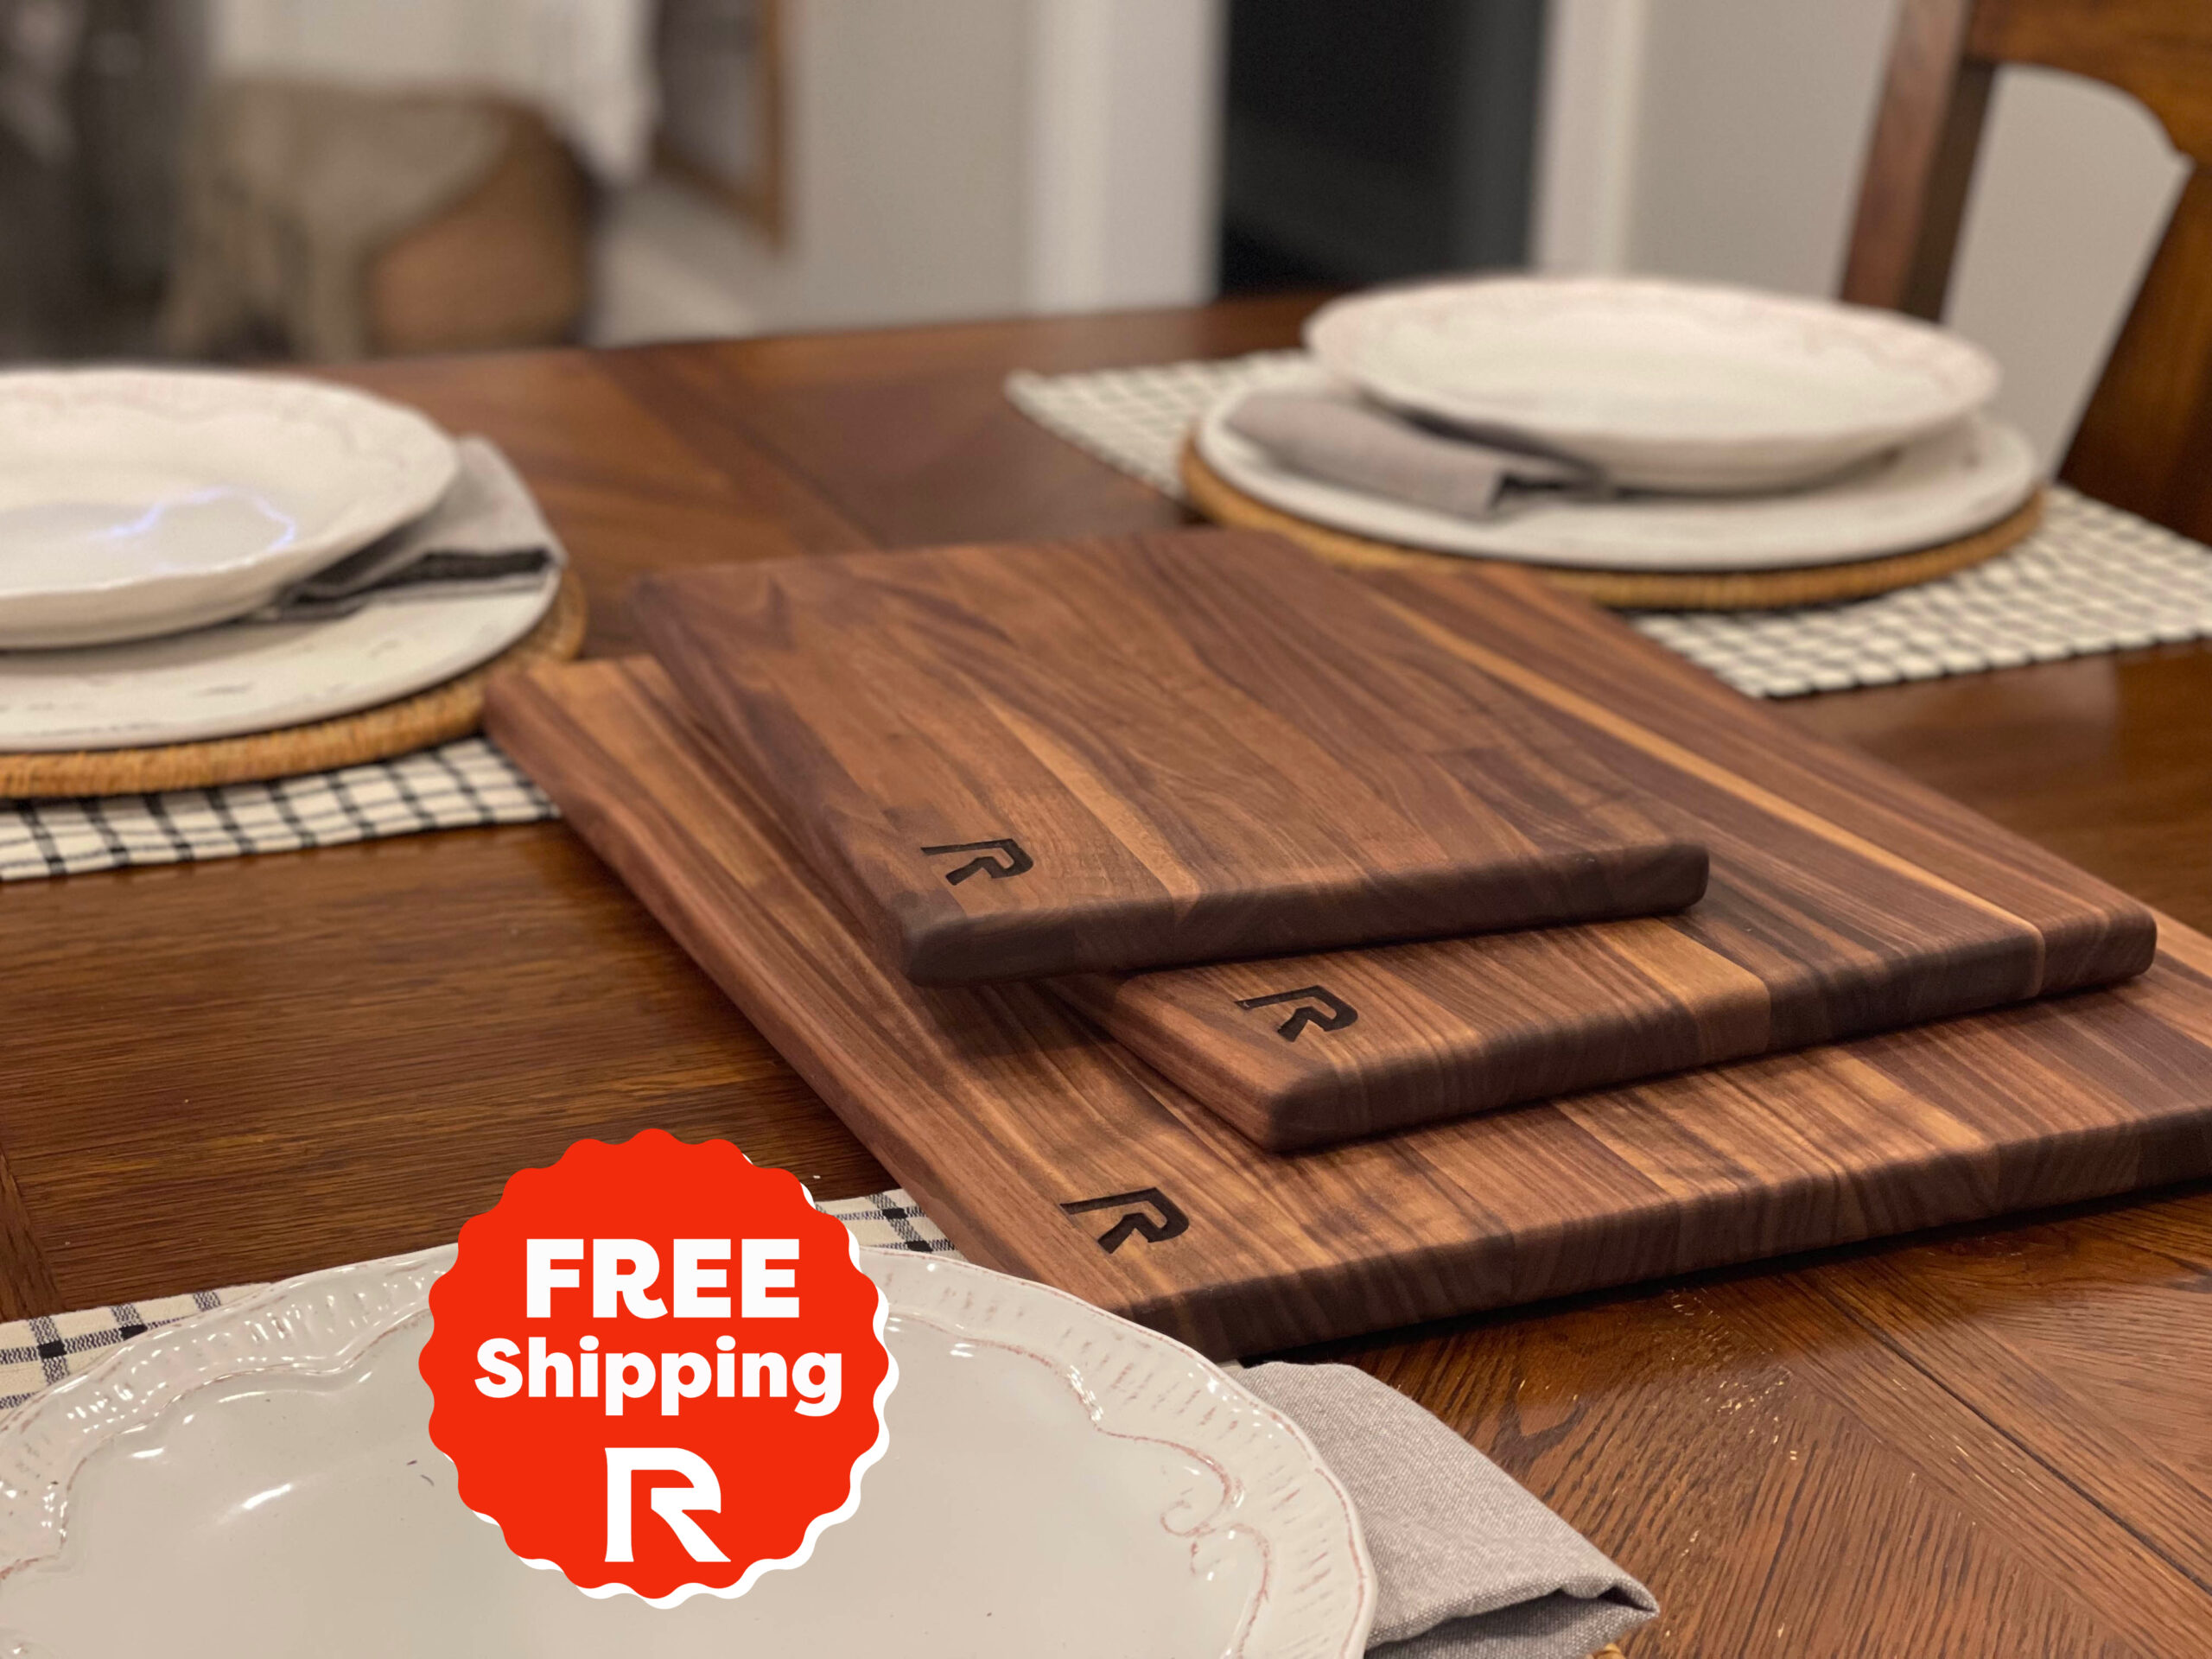 charcuterie Cutting board set- Utility set is heavy duty for BBQ, brisket, grilling and will last a lifetime. Our cutting blocks are handmade in the US.